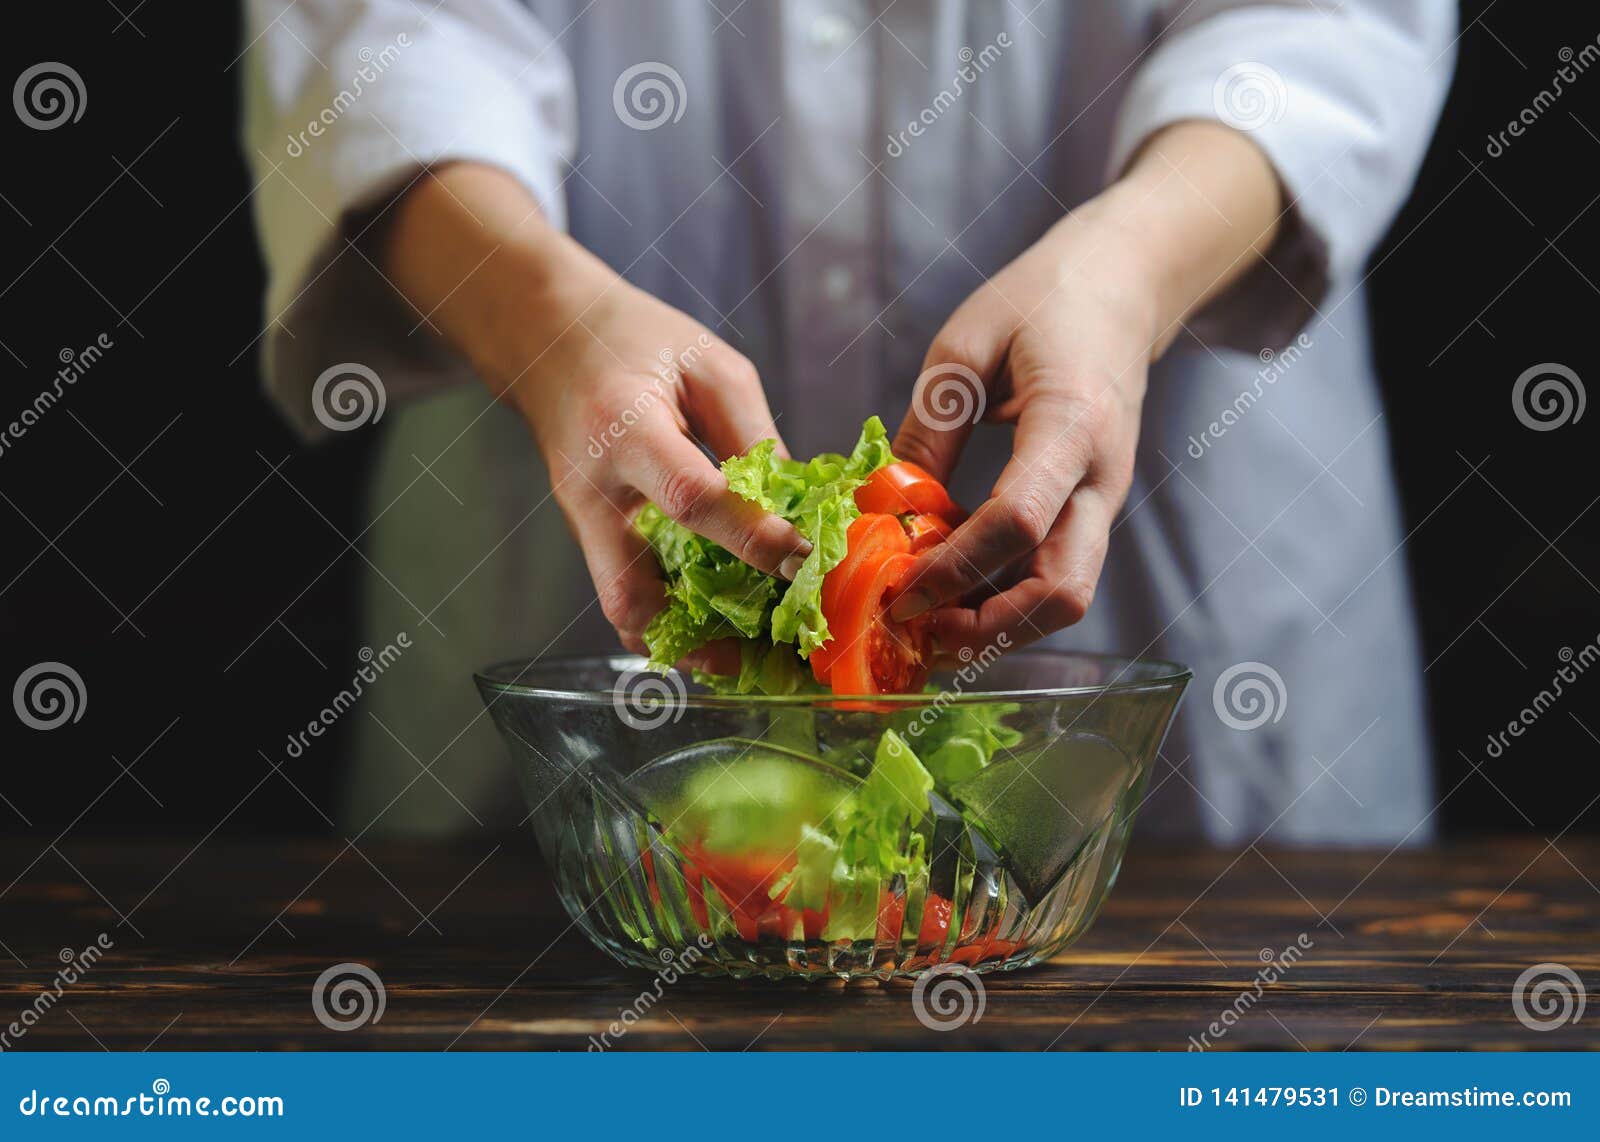 The Chef Prepares a Salad of Vegetables Stock Image - Image of ...